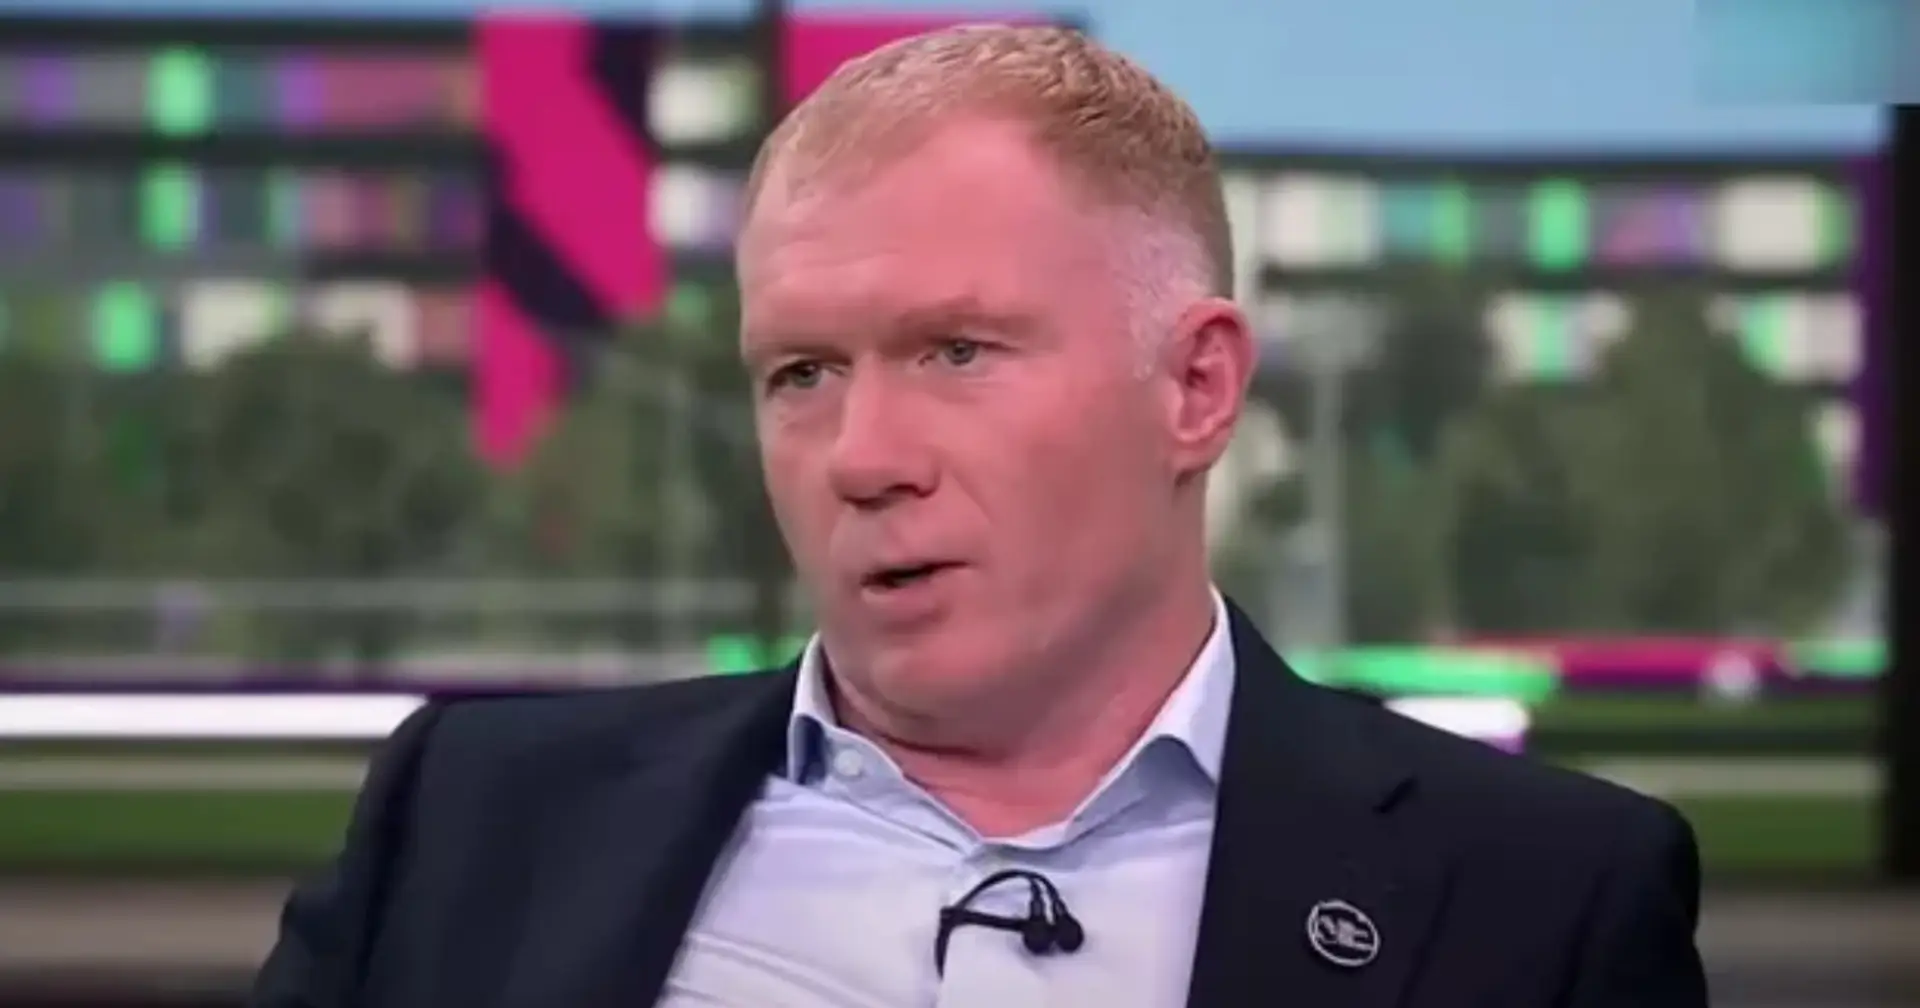 'So easy to play against': Paul Scholes singles out two Man United stars for criticism after Palace defeat